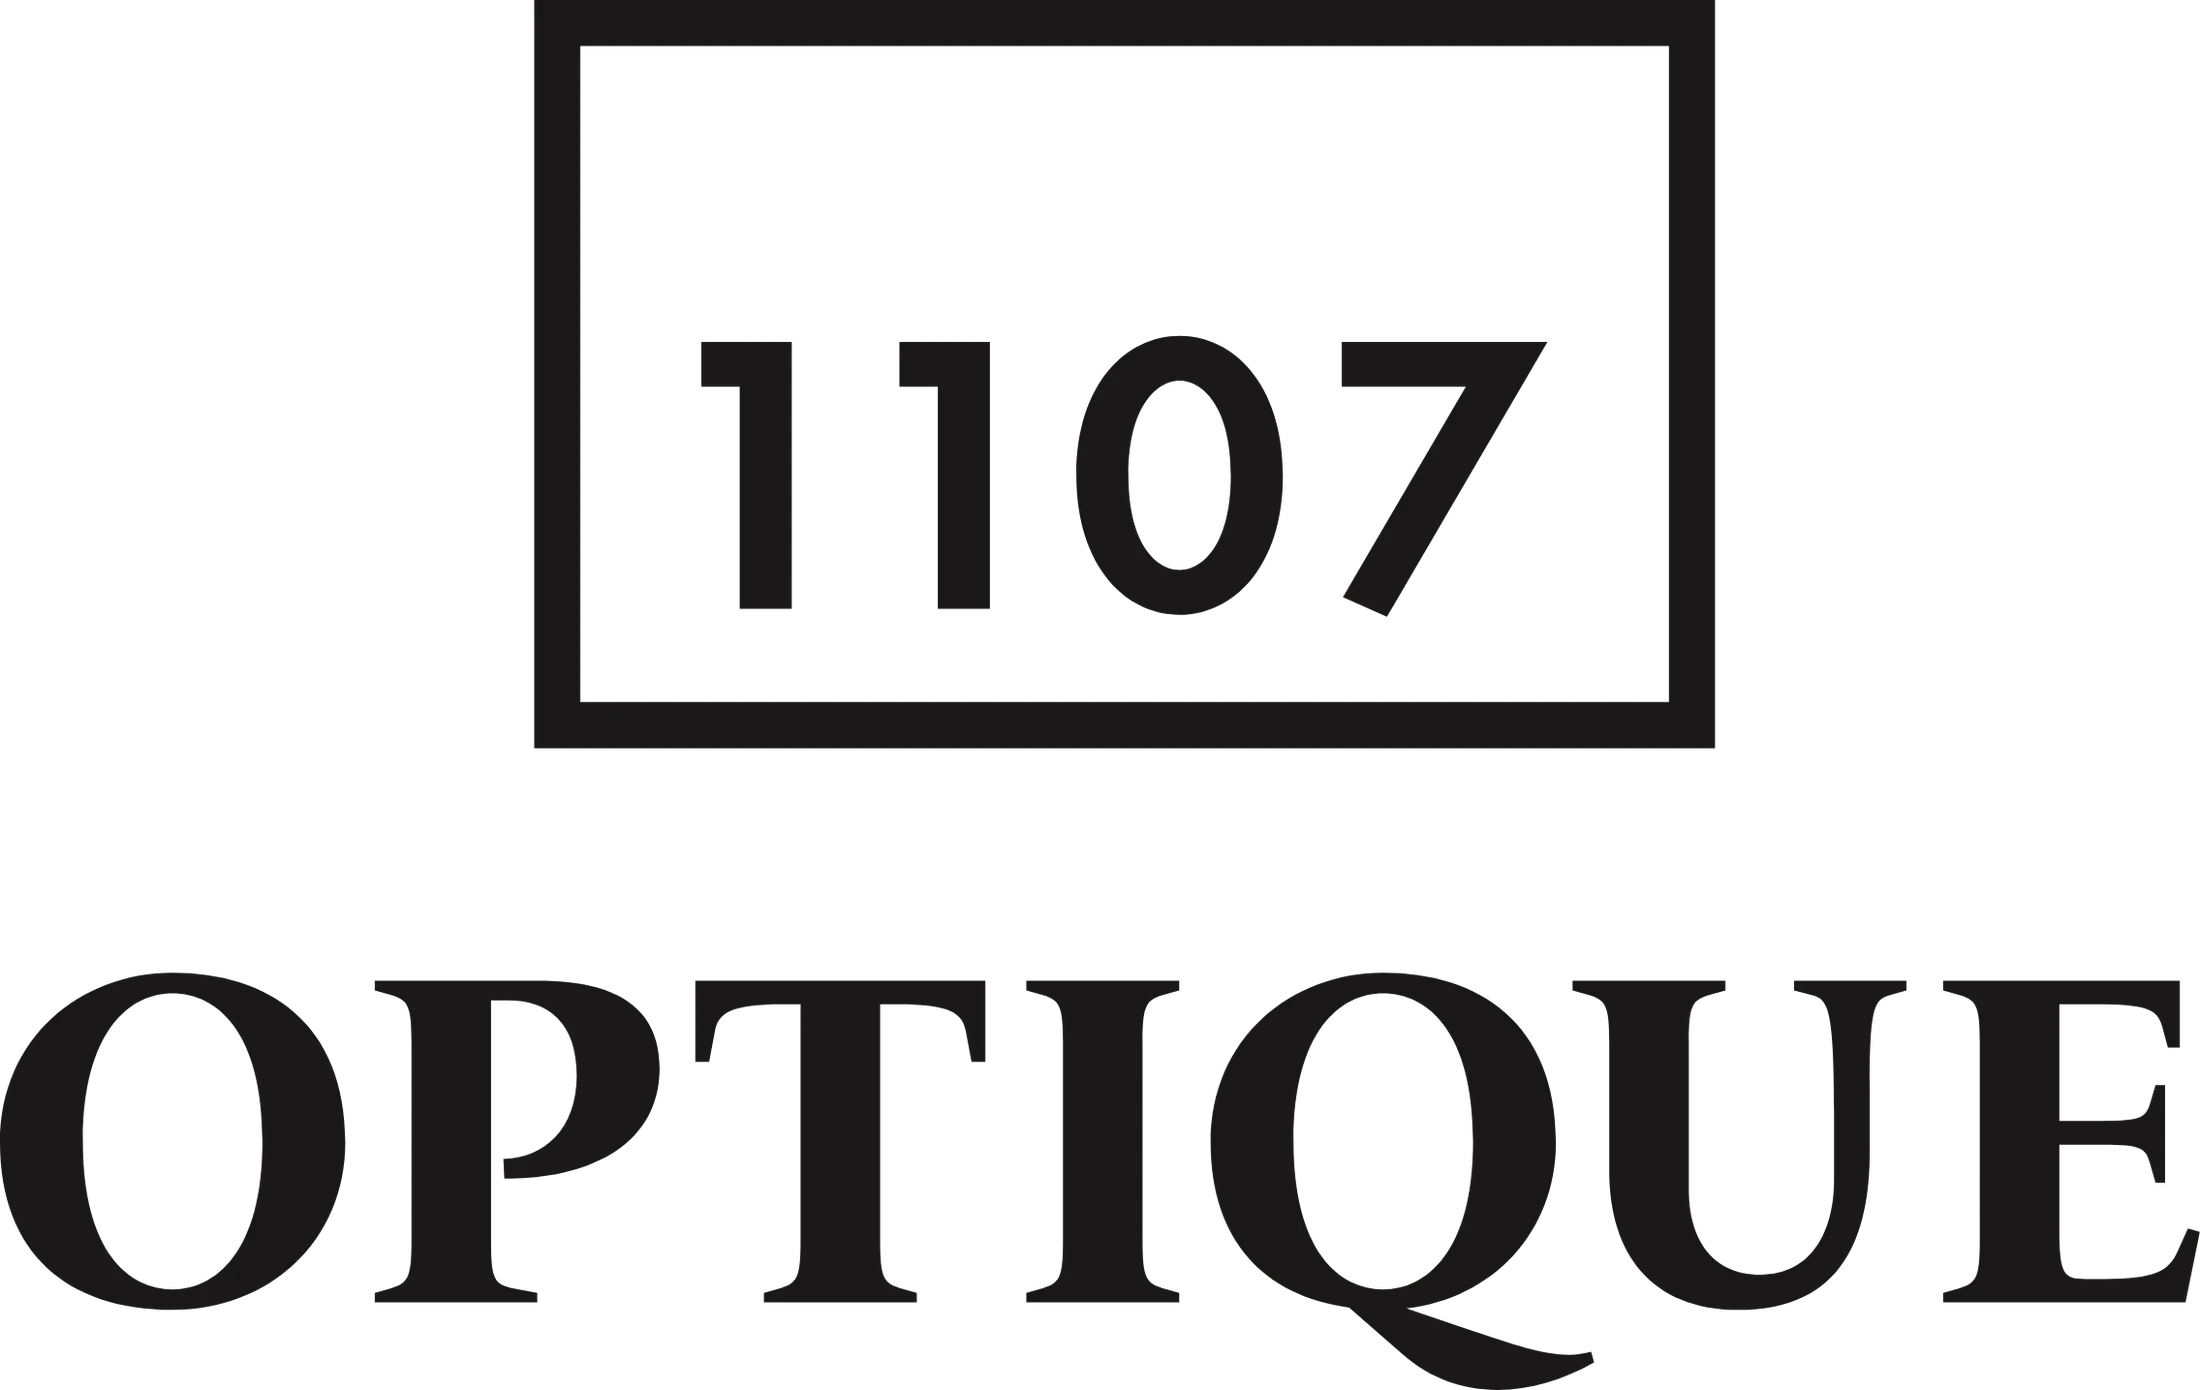 The logo for optique on a black background.